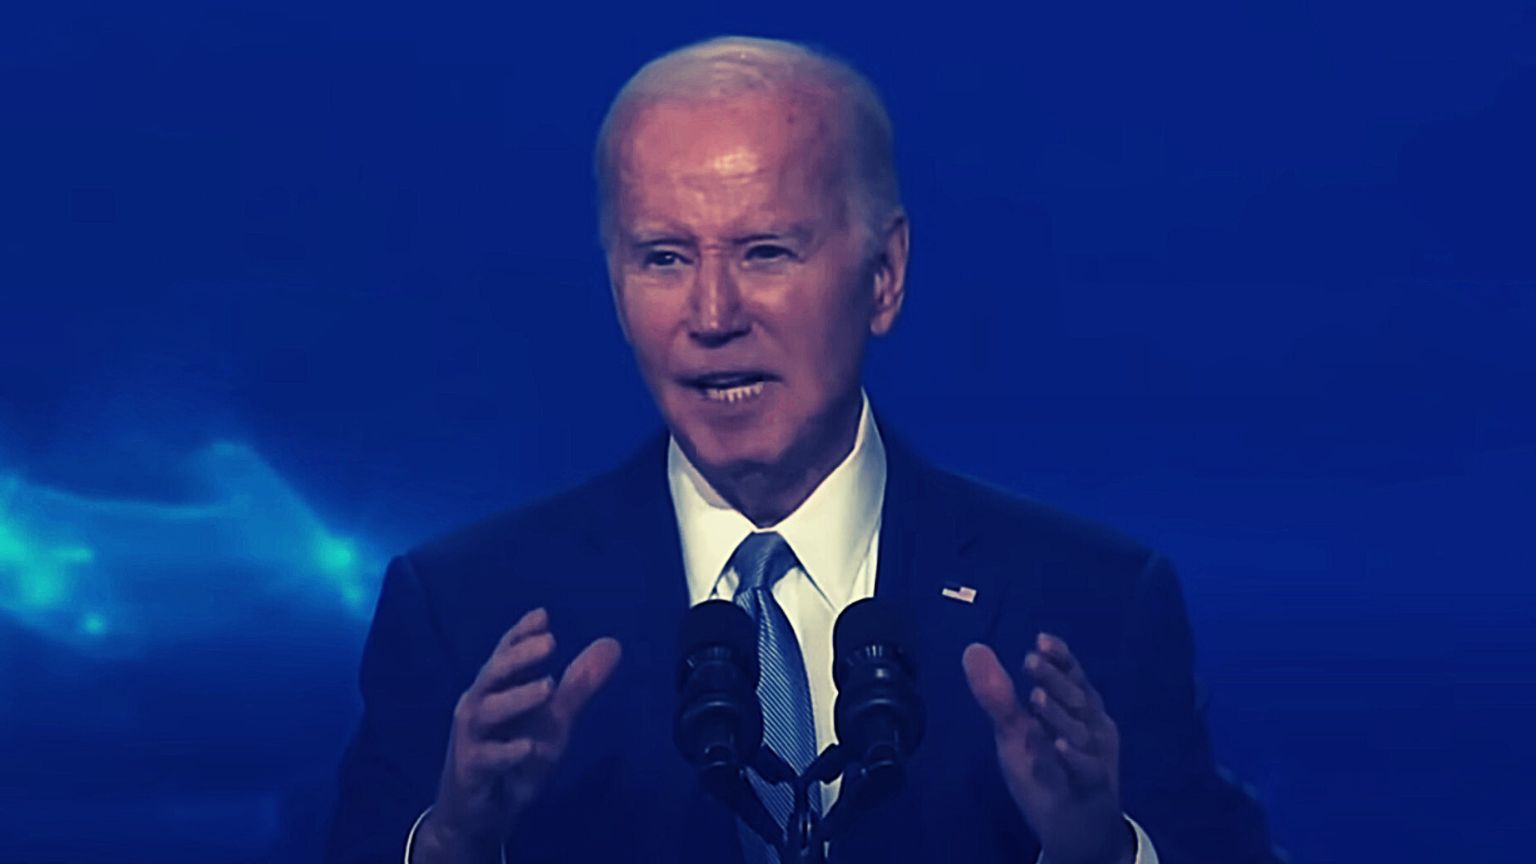 Biden Complains About Provision That Bans Pentagon From Contracting With Censorship Groups, “Fact-Checkers”